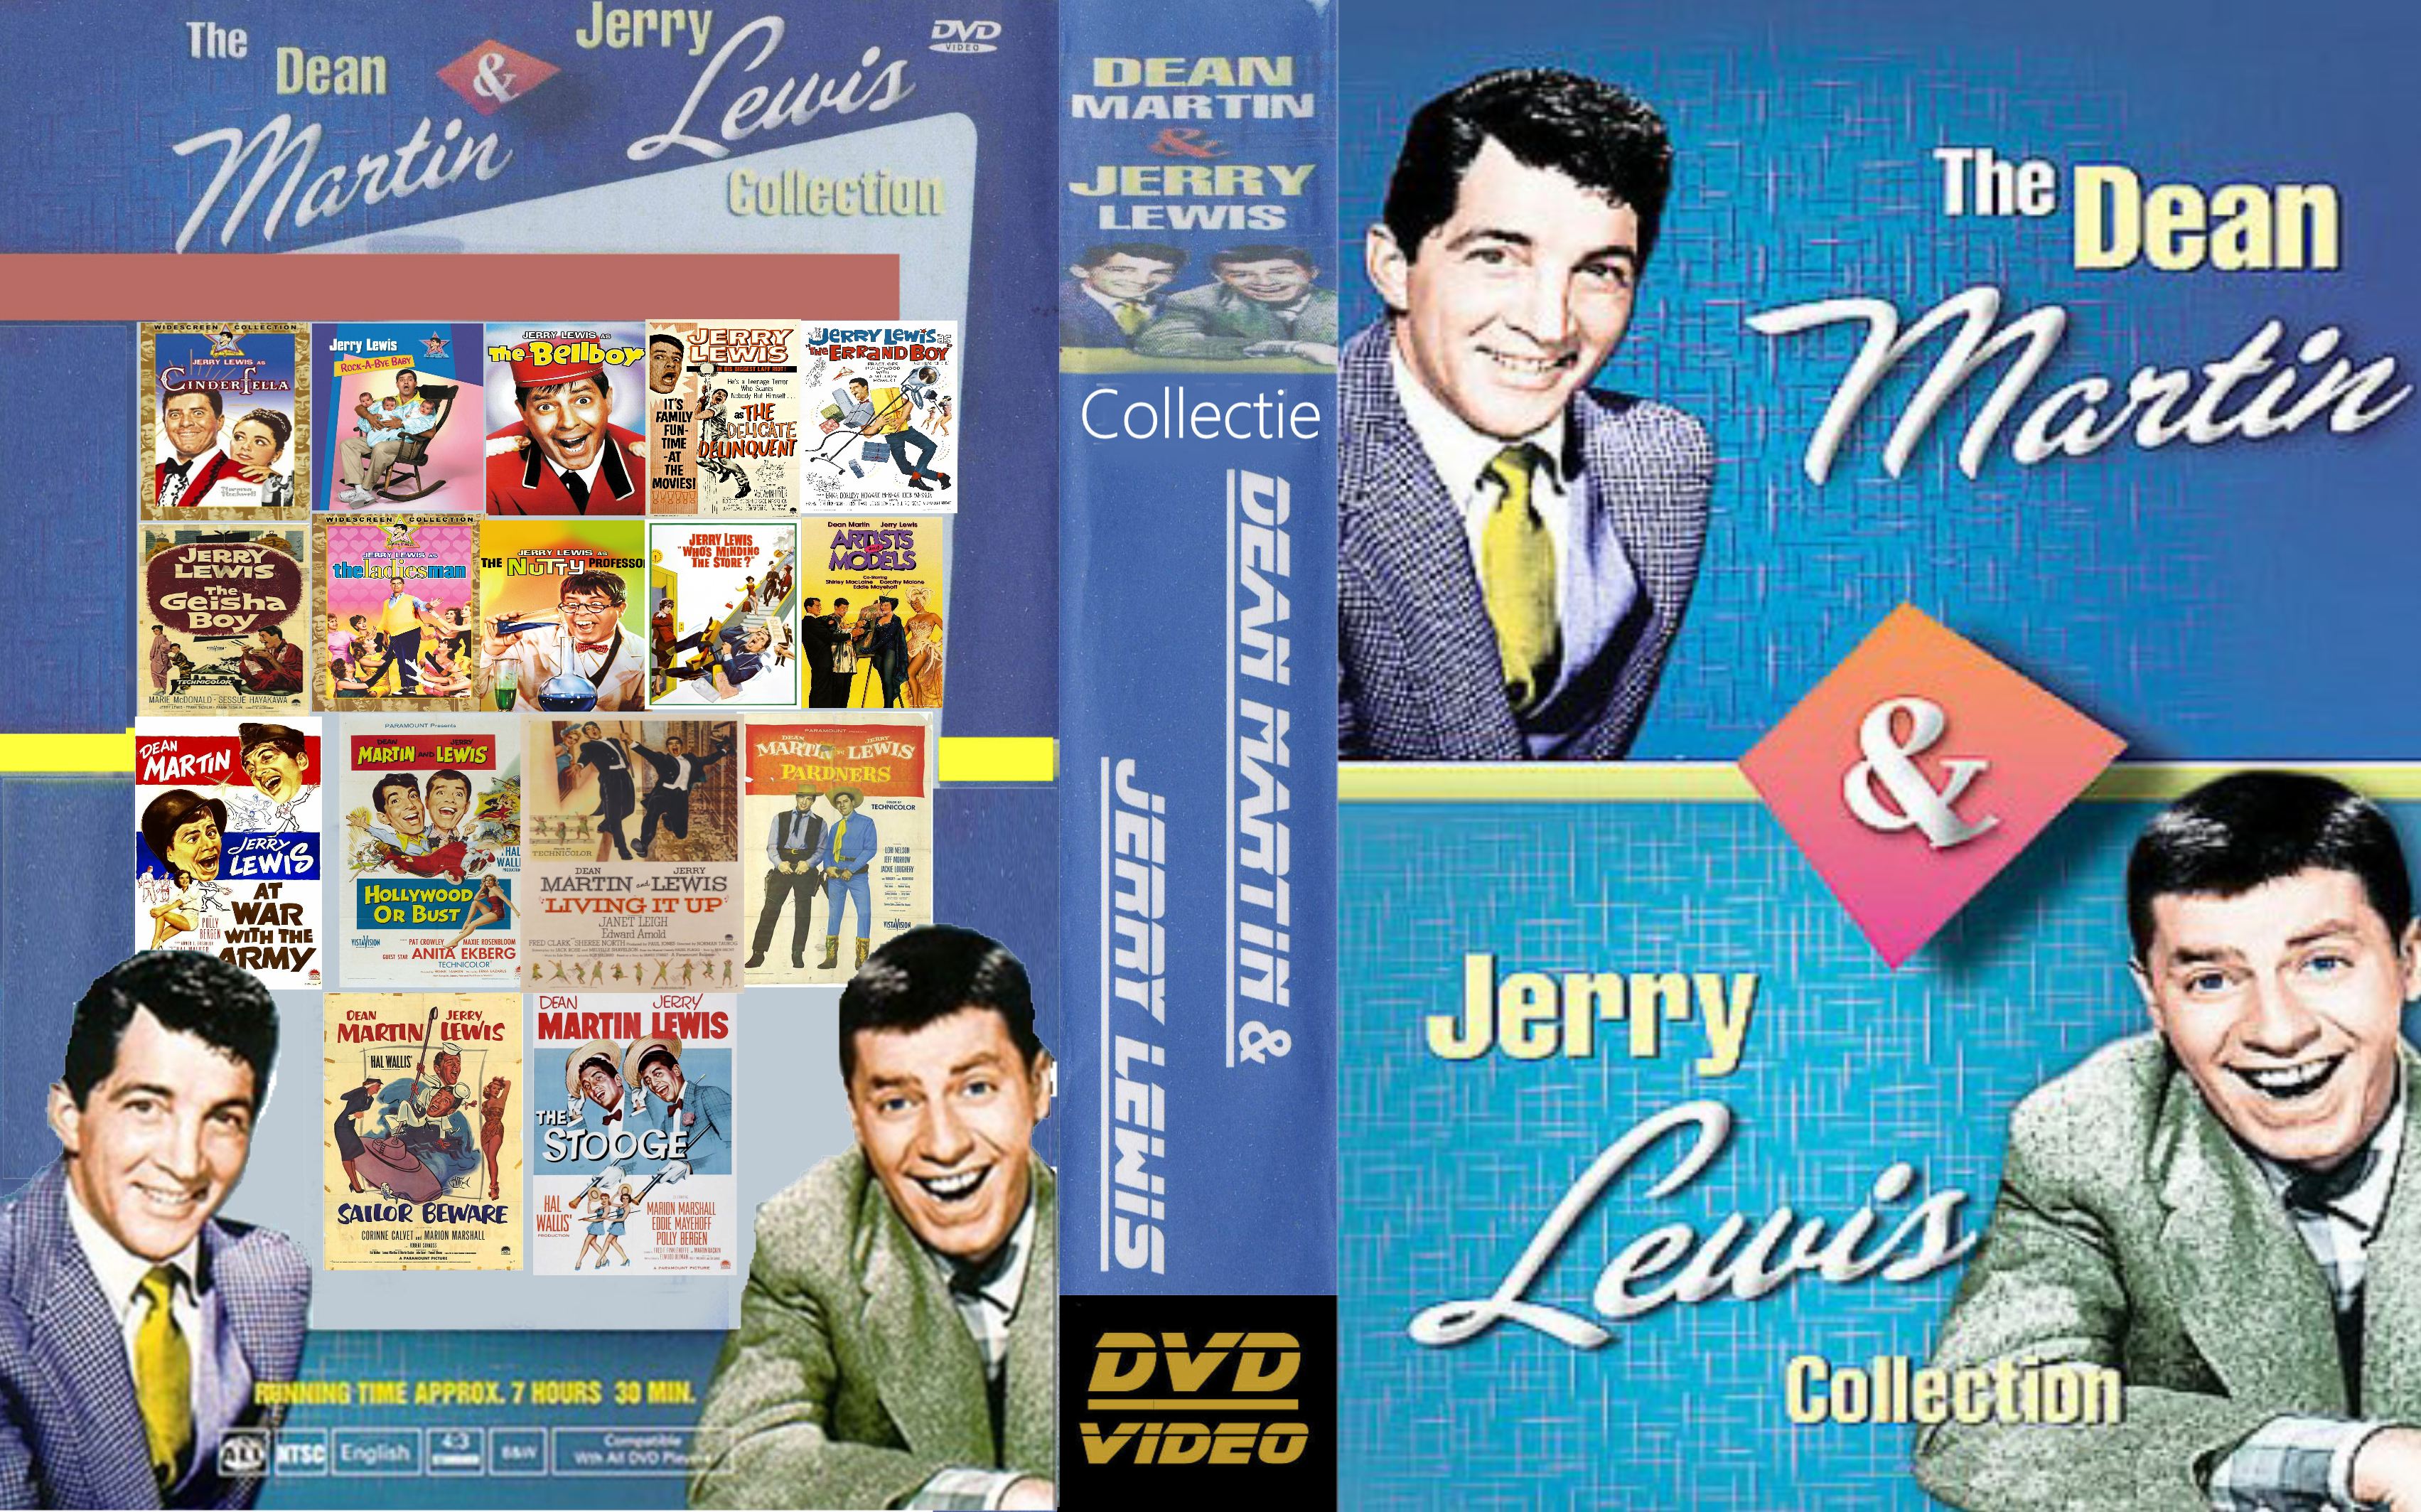 Jerry lewis & Dean Martin Collectie - Artist and Models (1955)